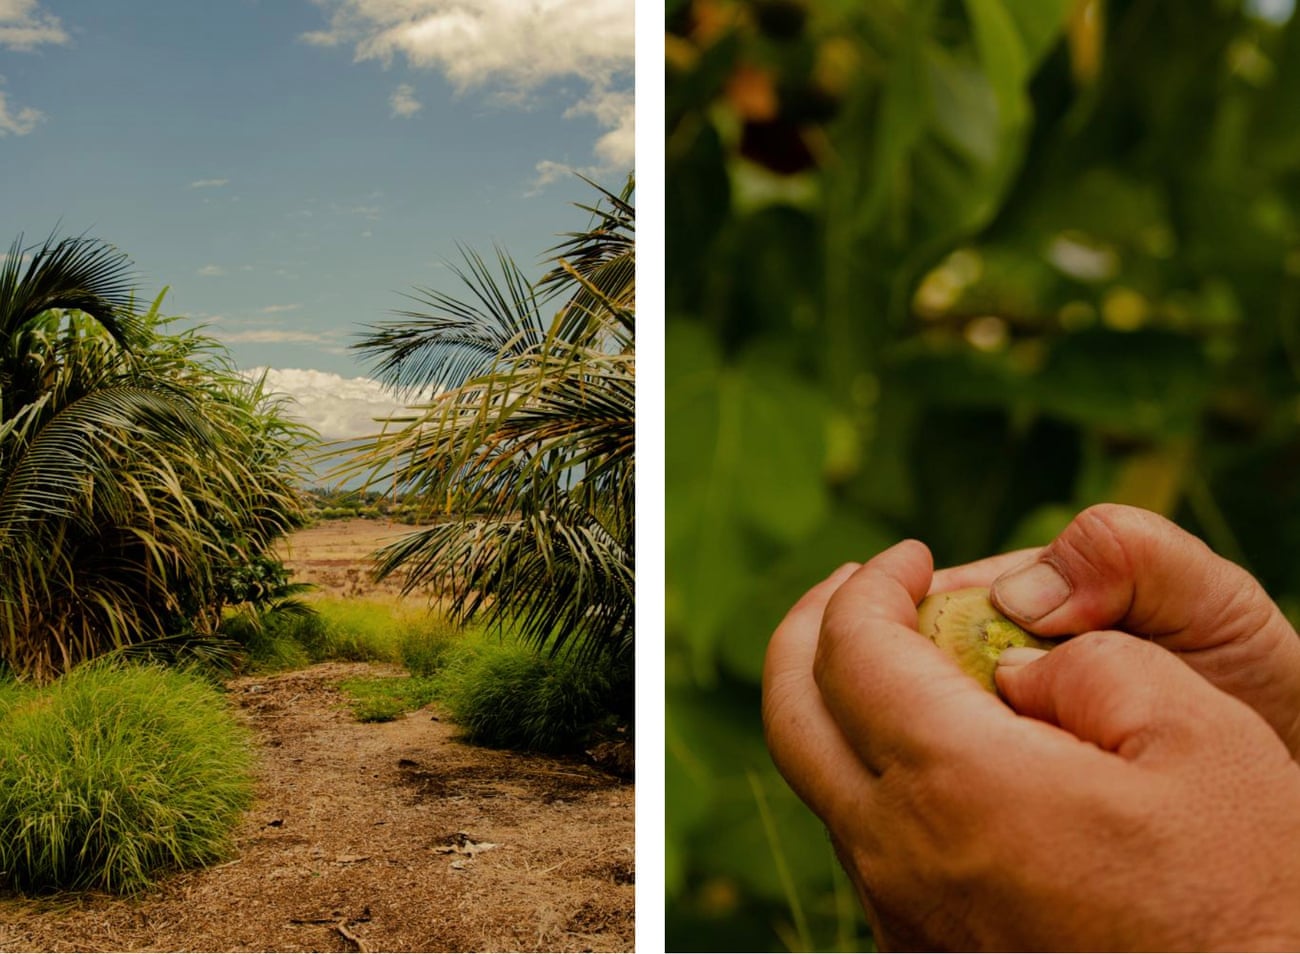 At left, farmland is lush with green plants. At right, hands hold a yellow-green milo fruit.